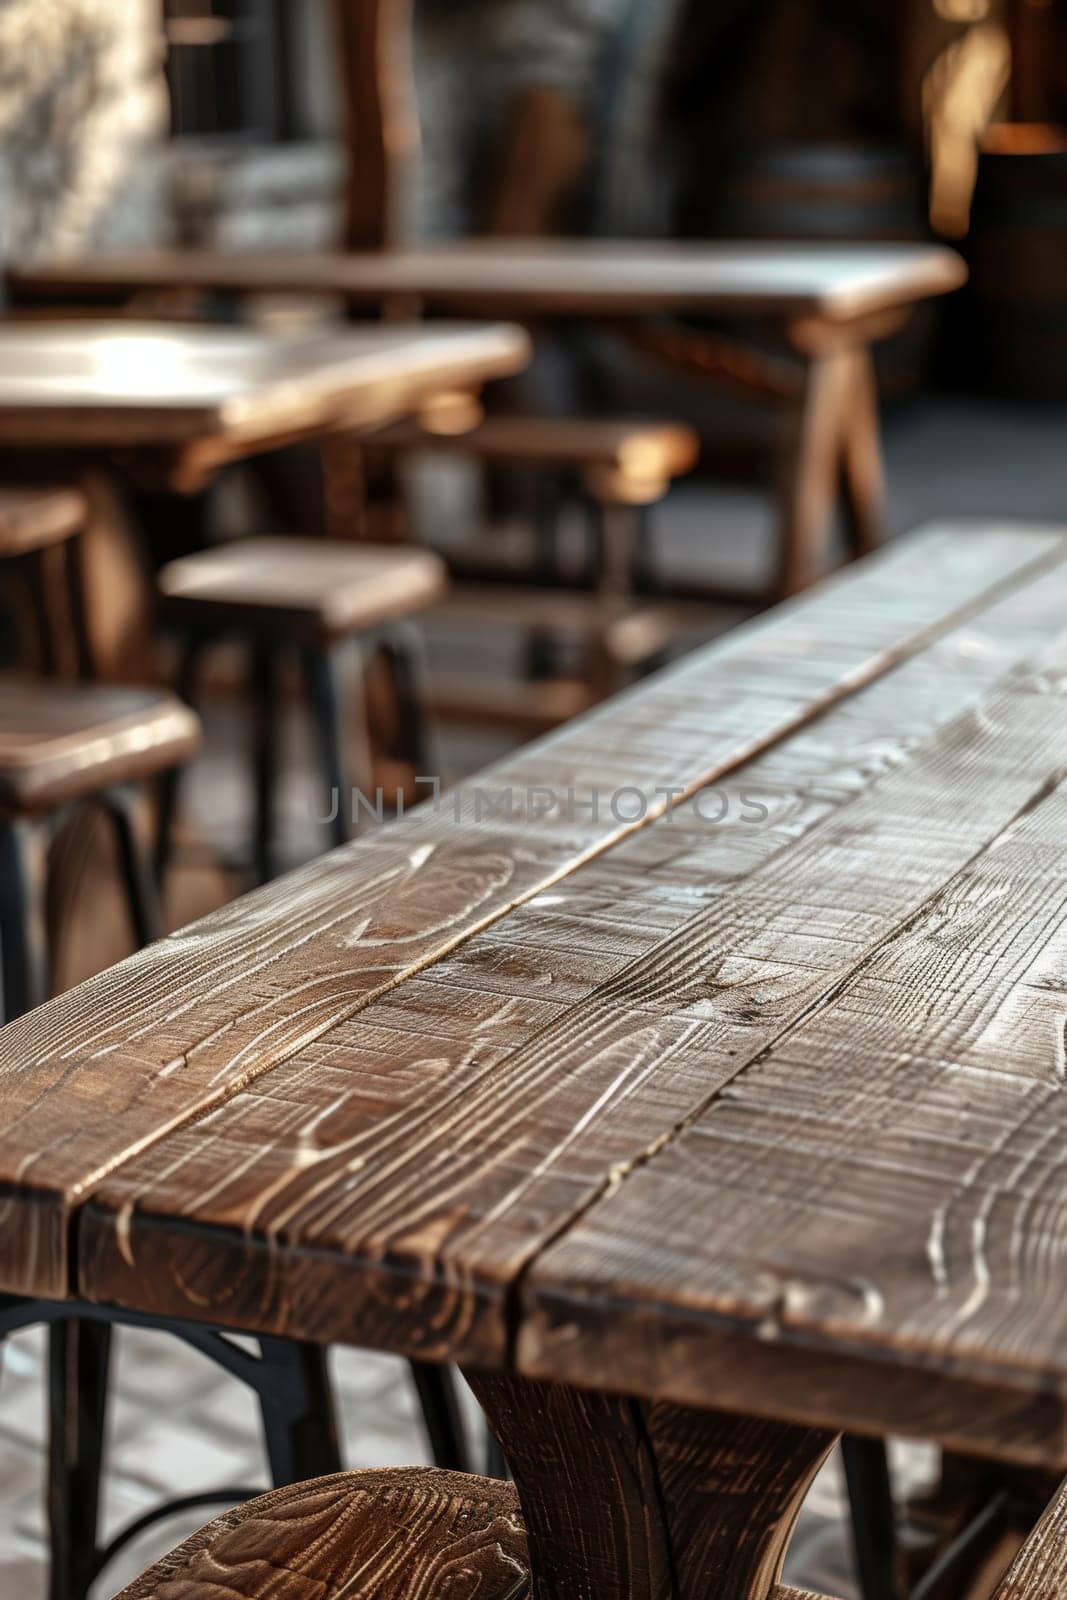 Warm sunlight bathes a rustic wooden table, highlighting the textured grain and natural imperfections. The table stands in a cozy cafe setting, inviting casual conversations and peaceful moments